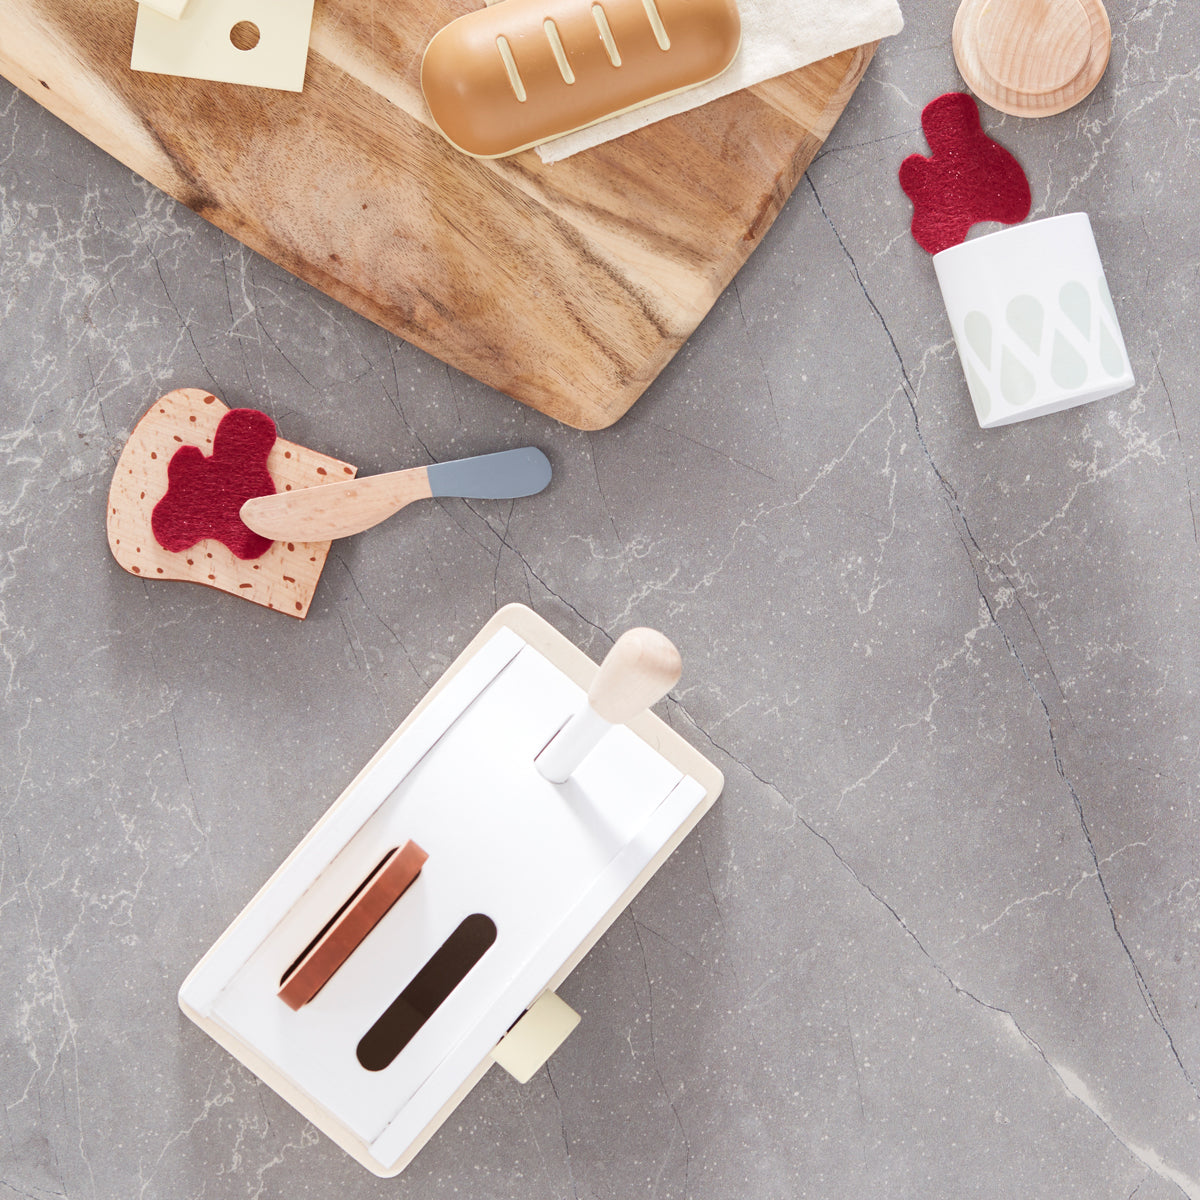 Kids concept Wooden toaster set with jam and a wooden knife